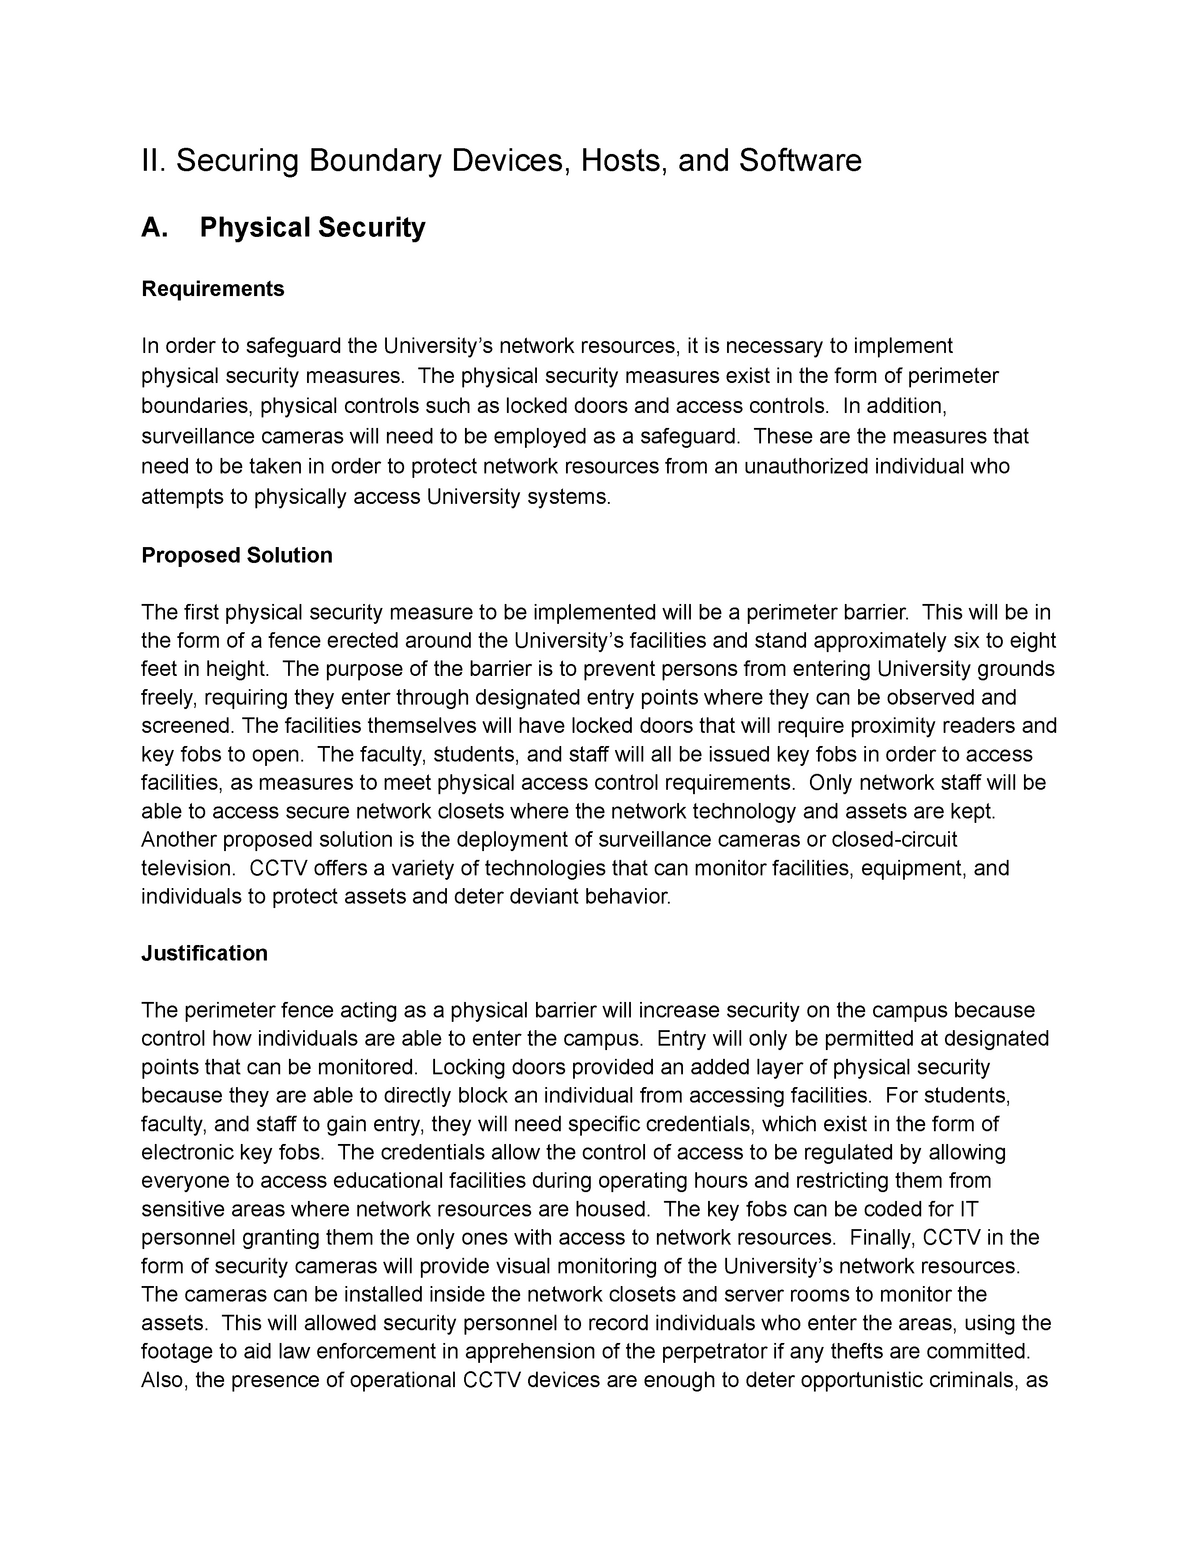 research proposal on information security